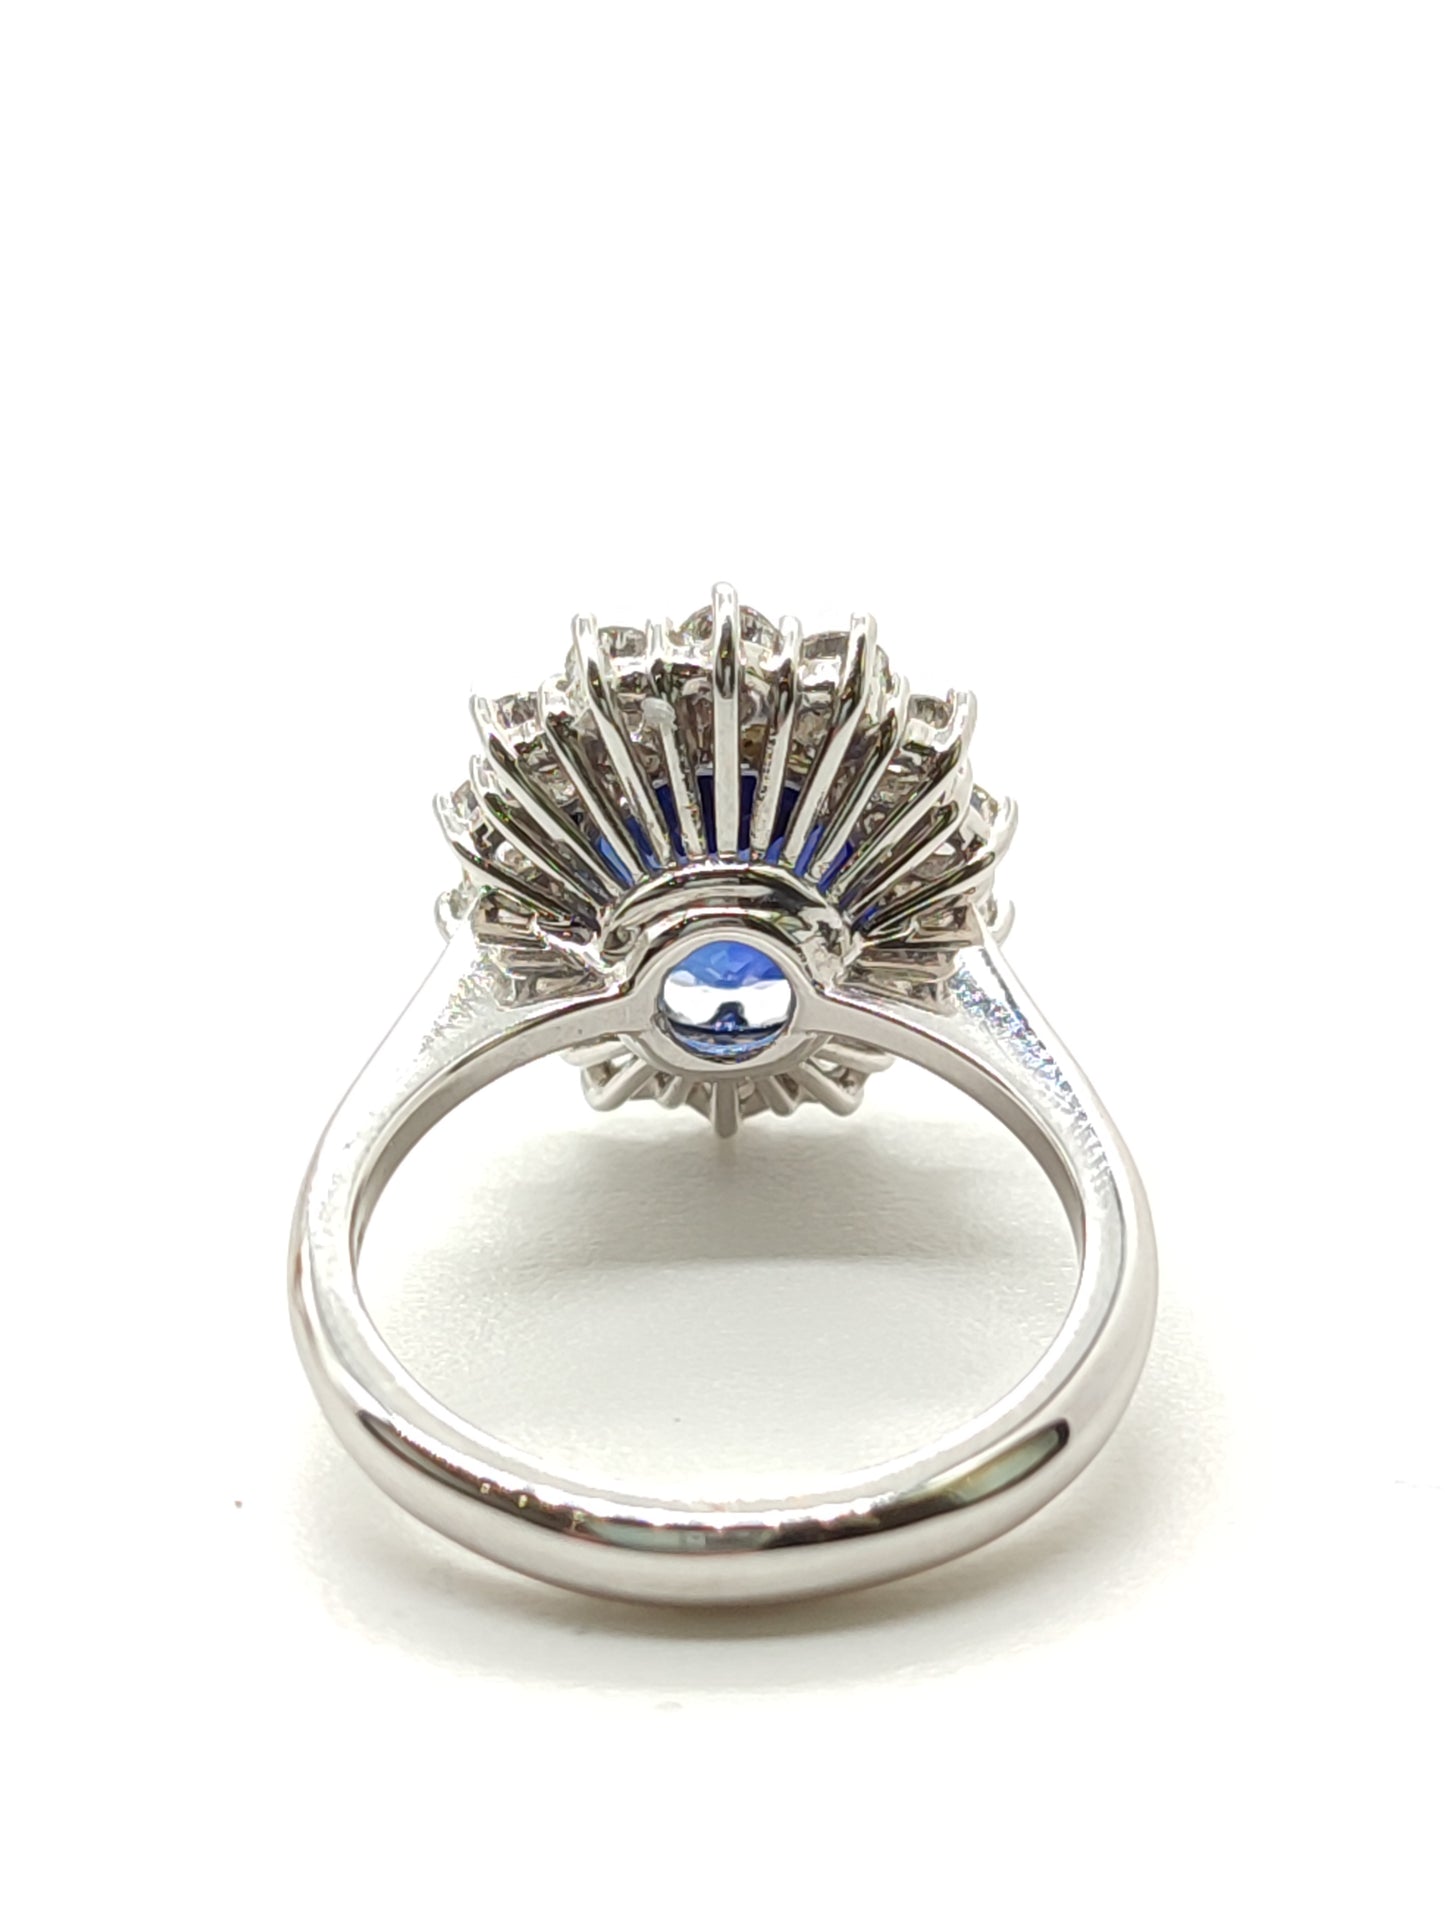 Gold solitaire ring with created sapphire and diamonds